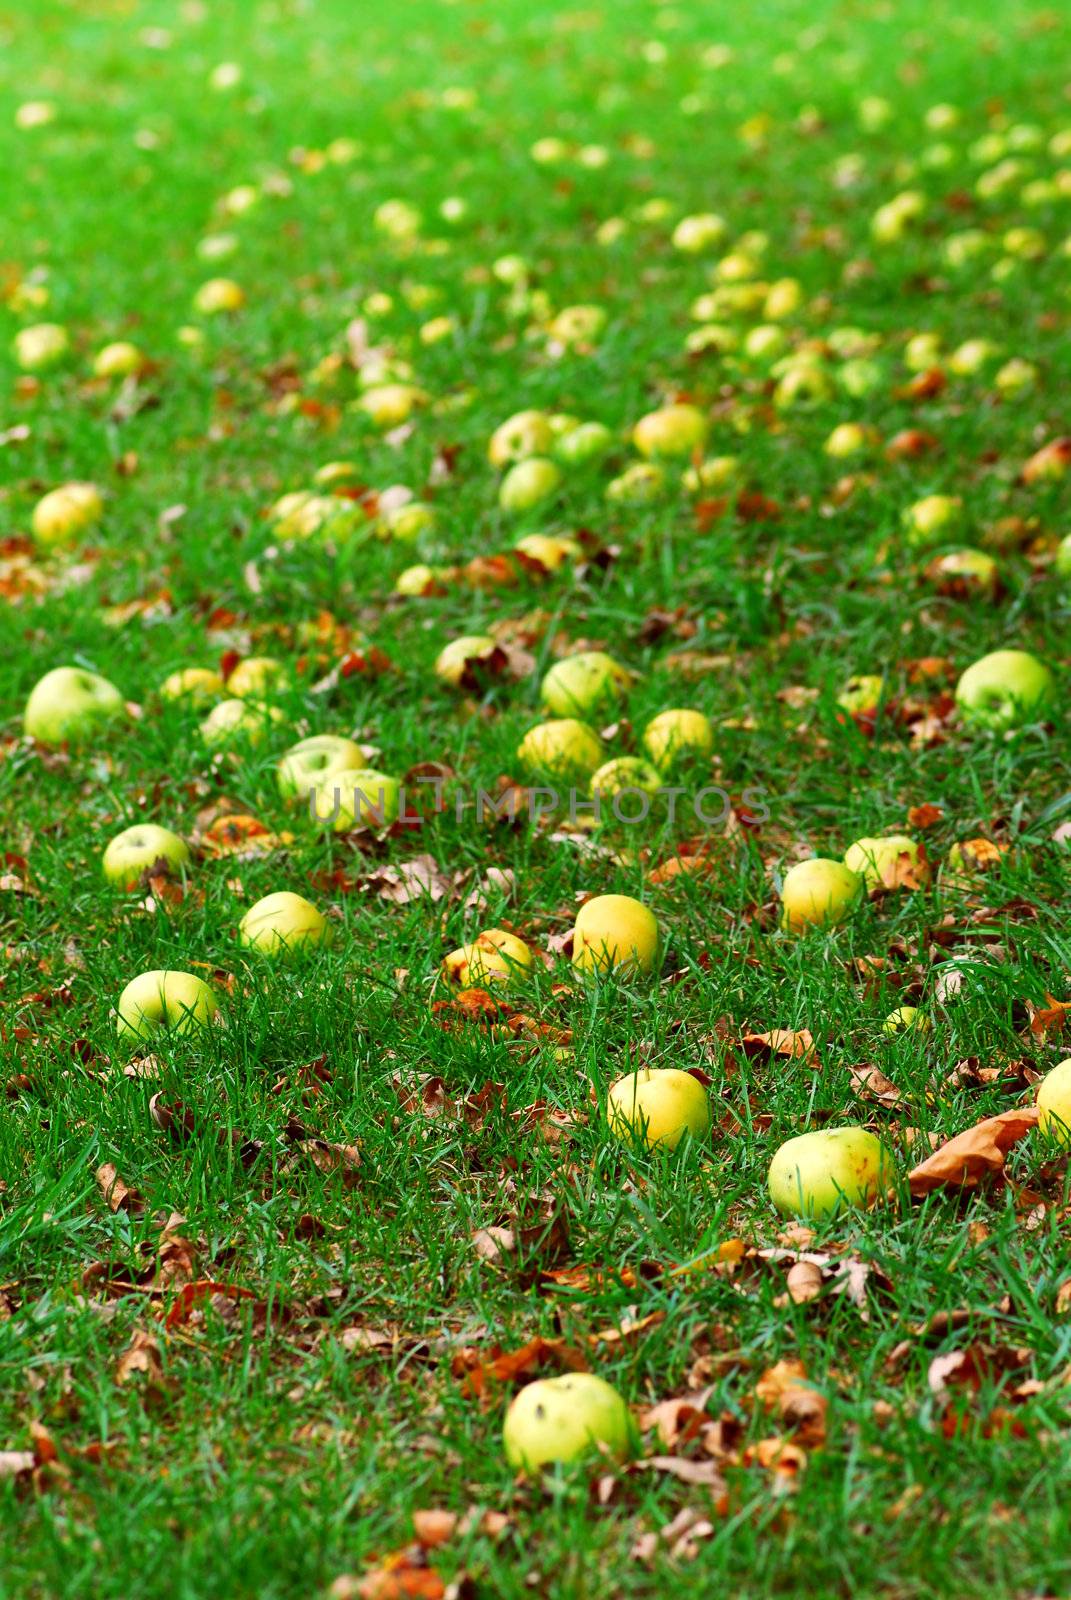 Fallen apples under a tree in an orchard